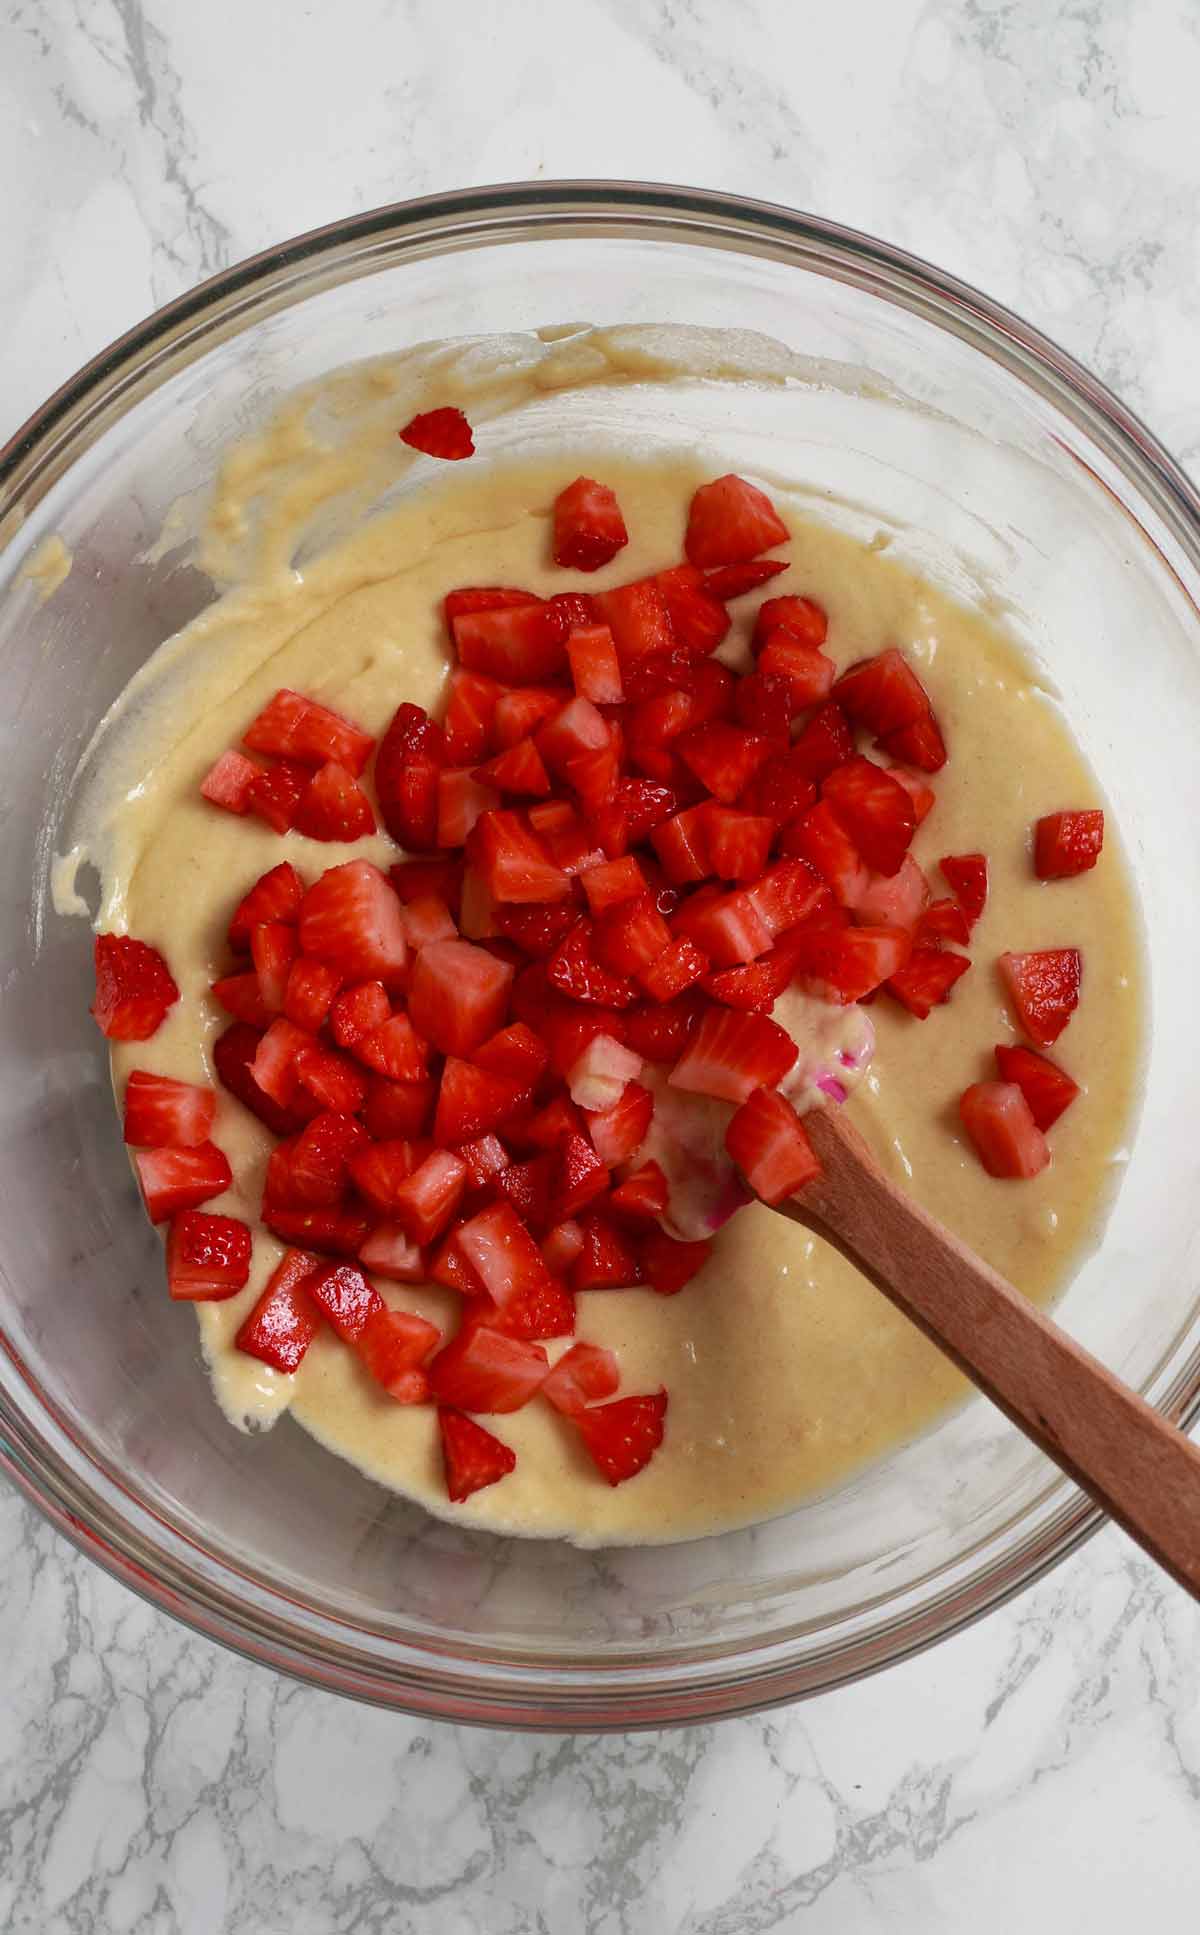 Batter In A Bowl With Strawberry Pieces